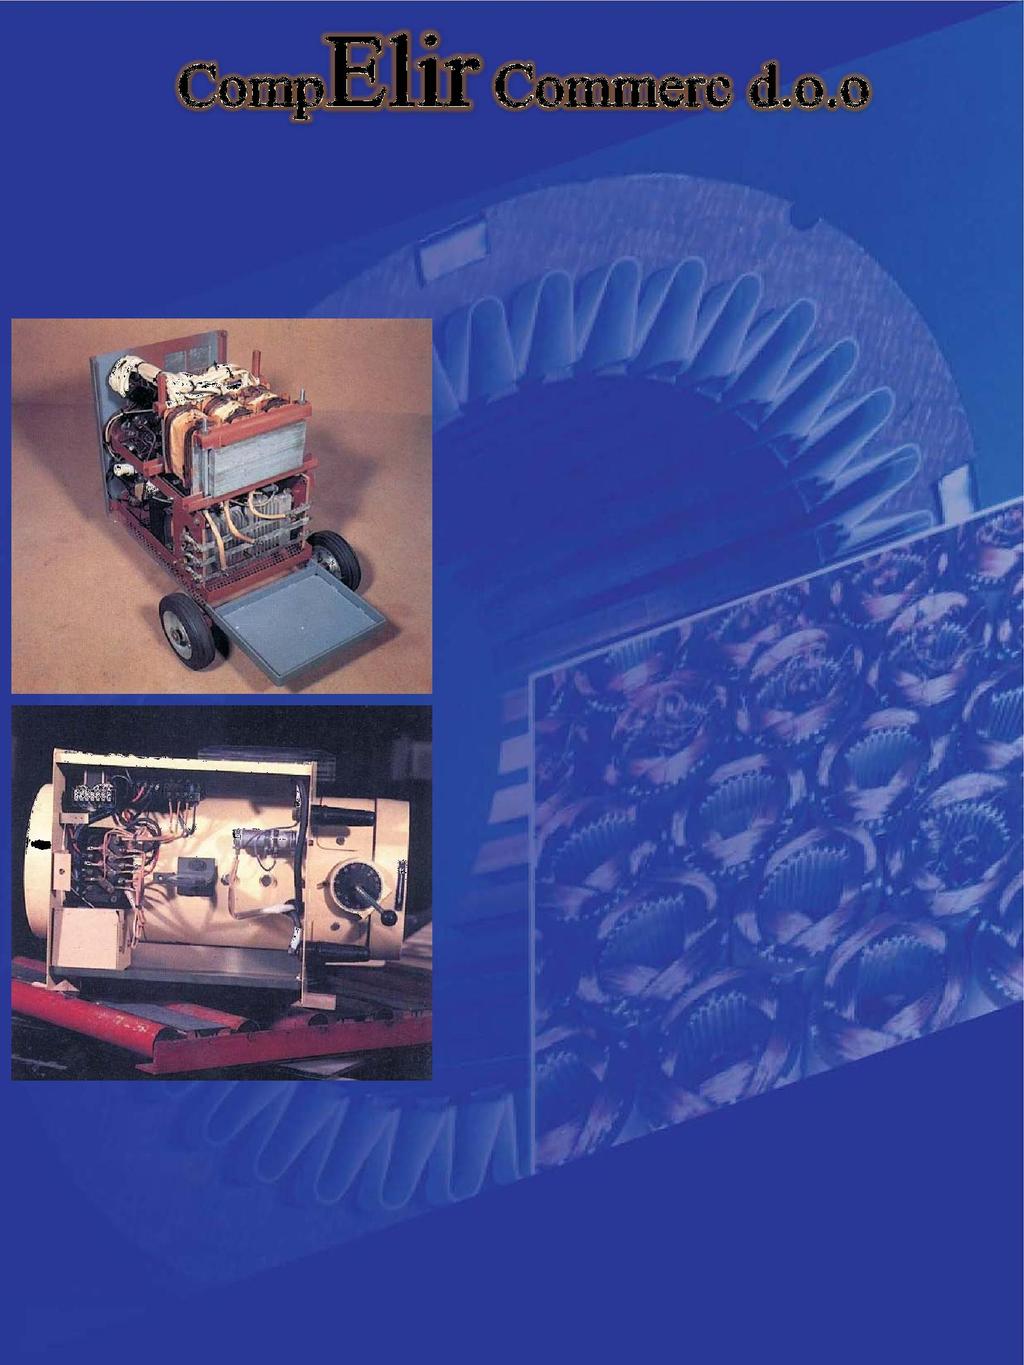 WELDING MACHINES Repair and service equipment for arc and resistance welding, automatic and semi-automatic welding devices, and procedures MAG, TIG, MIG rotary welding machines.